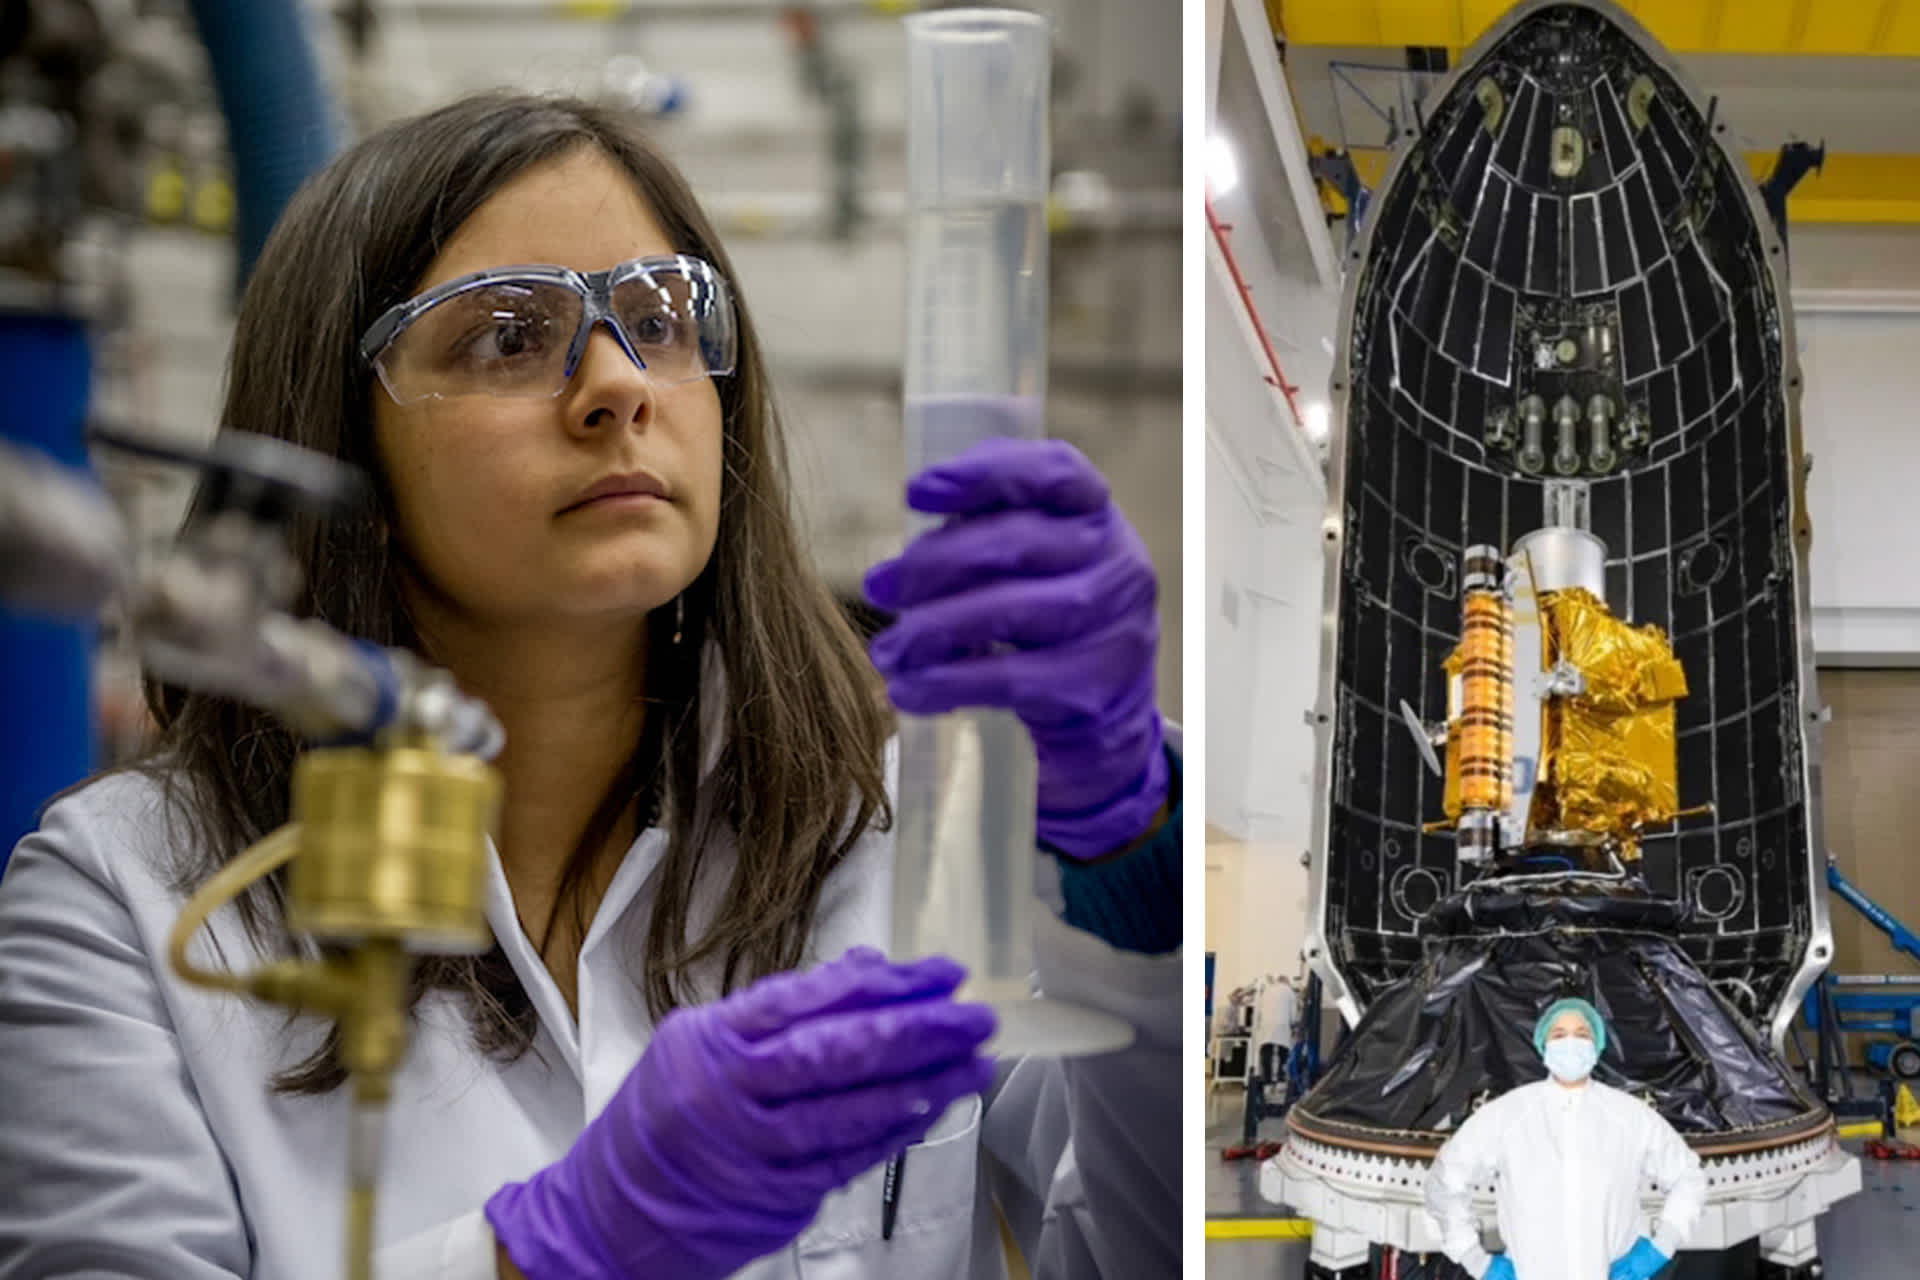 Split image: Left, Joan Melendez Misner looking at a liquid in a test tube. Right, she stands in front of a large spacecraft.